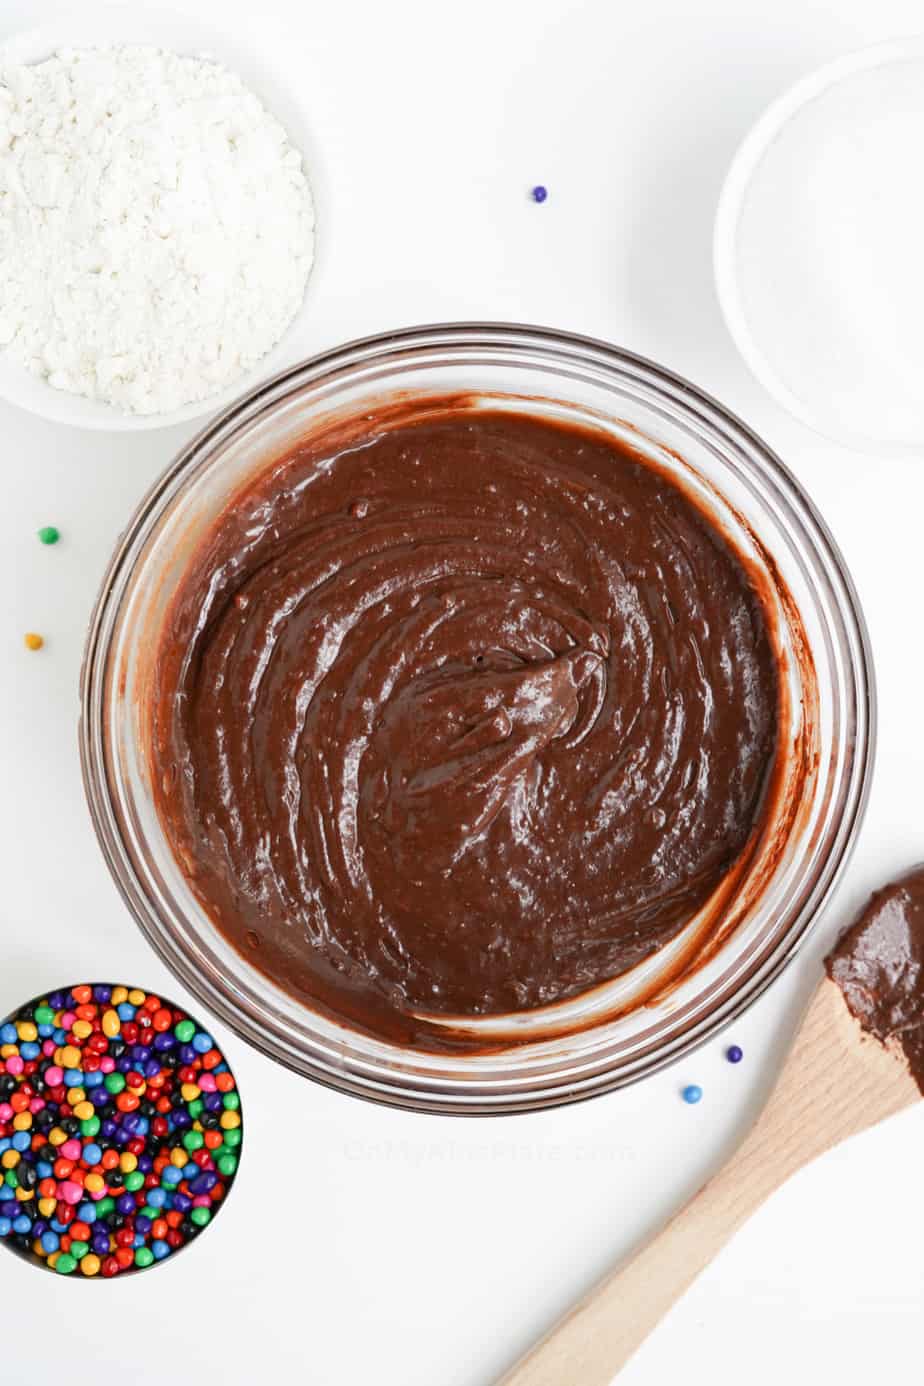 Mixing dry ingredients into cosmic brownie batter